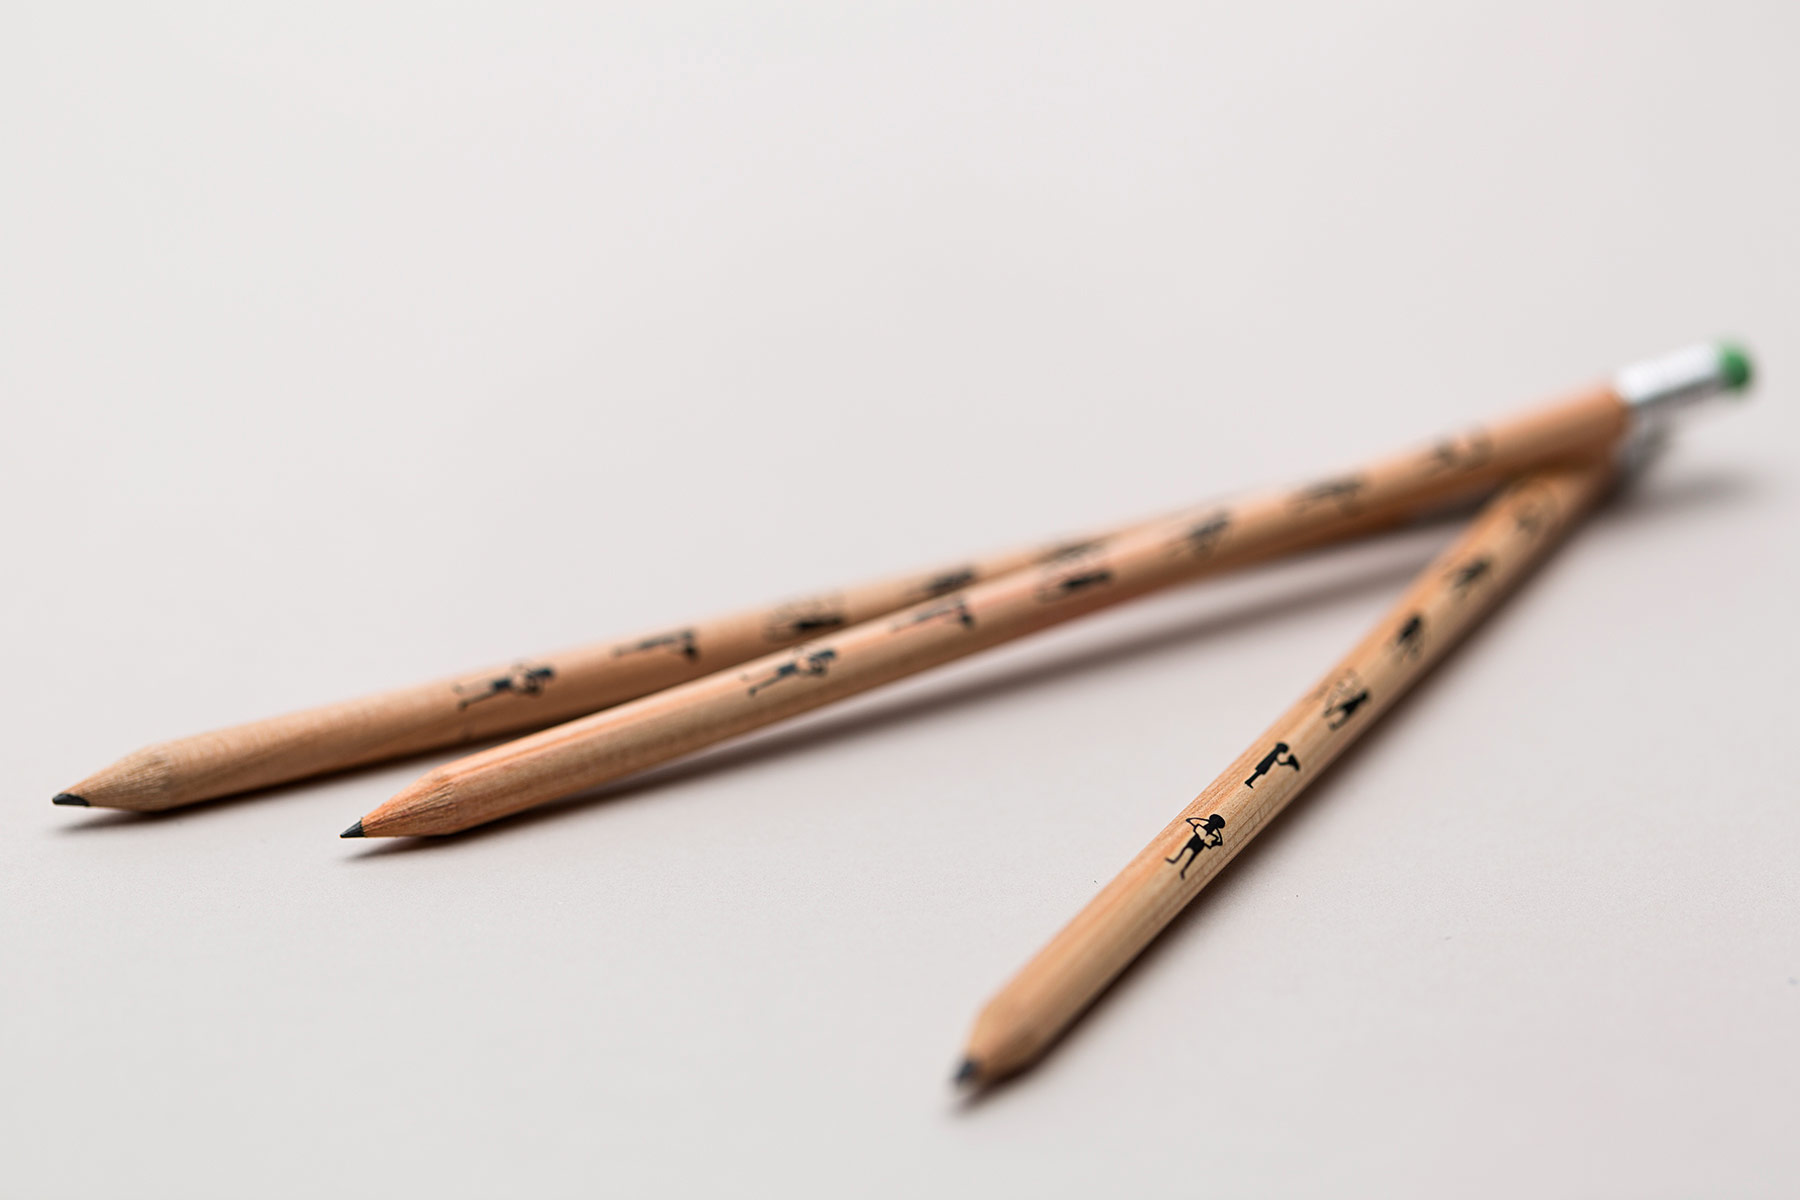 Pencils decorated with stick figure characters